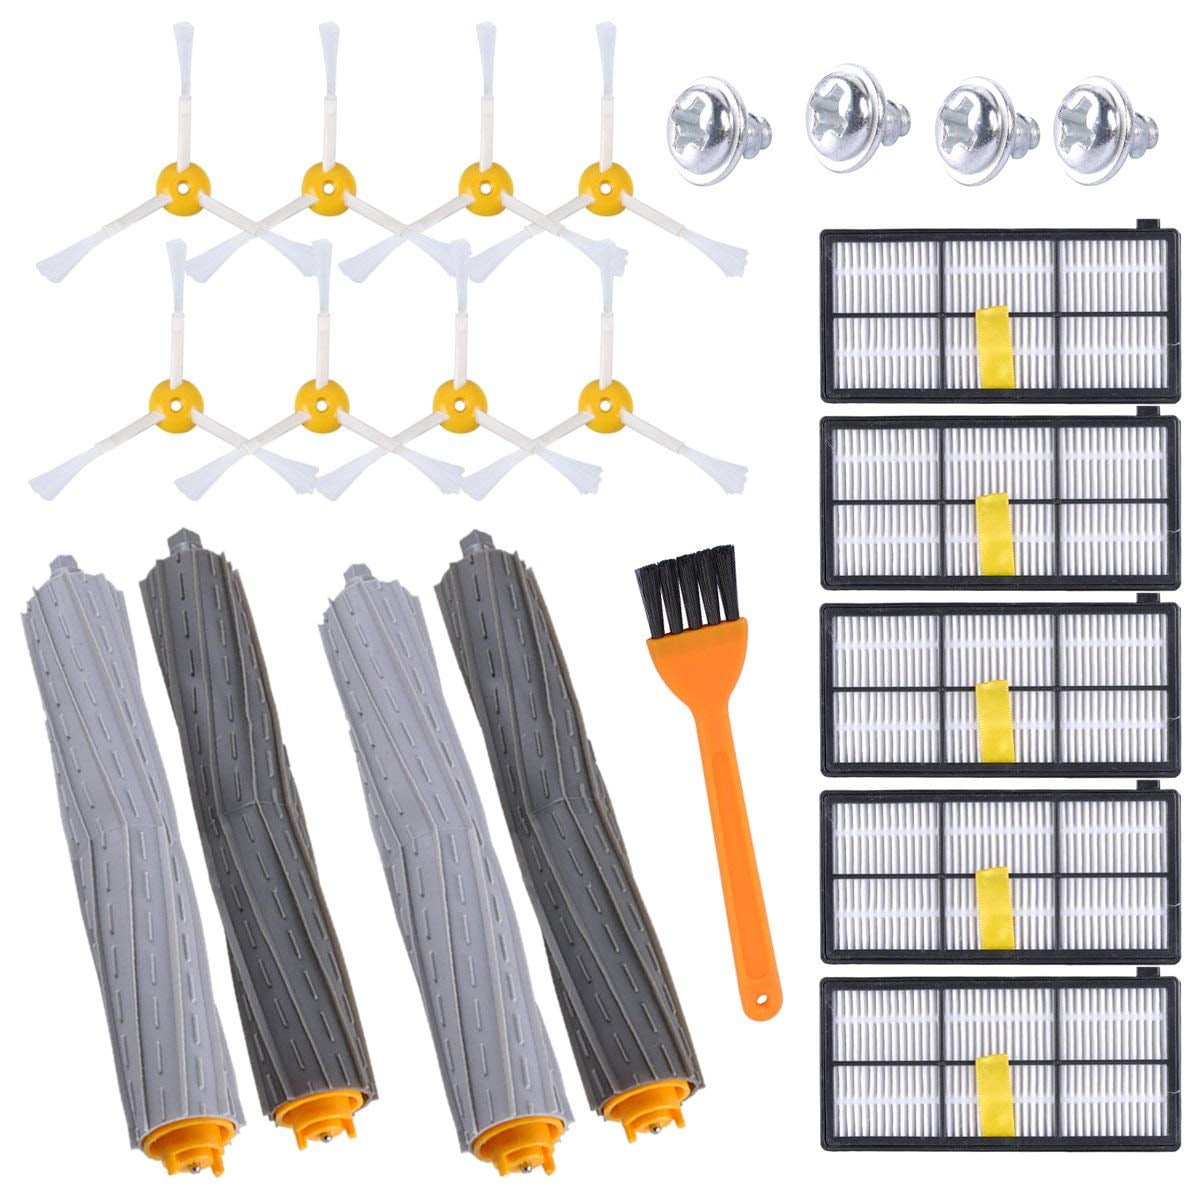 Vacuum Replacement Part Kit Filter Brush Sets for iRobot Roomba 800 870 900 980 